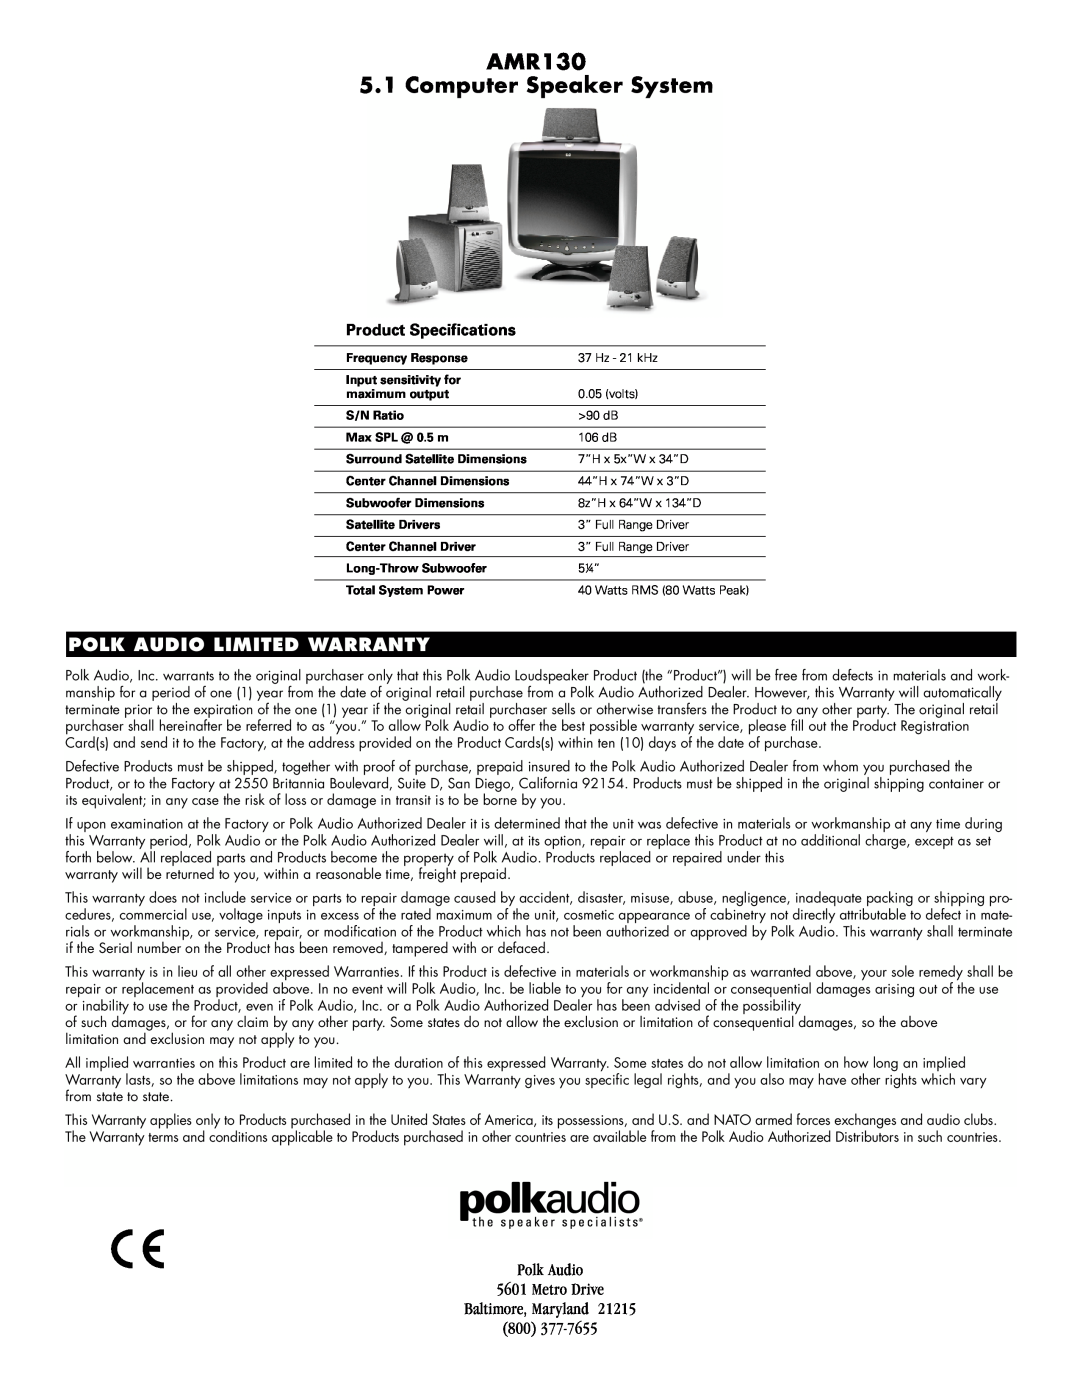 Polk Audio owner manual Product Specifications, AMR130 5.1 Computer Speaker System, Polk Audio Limited Warranty 